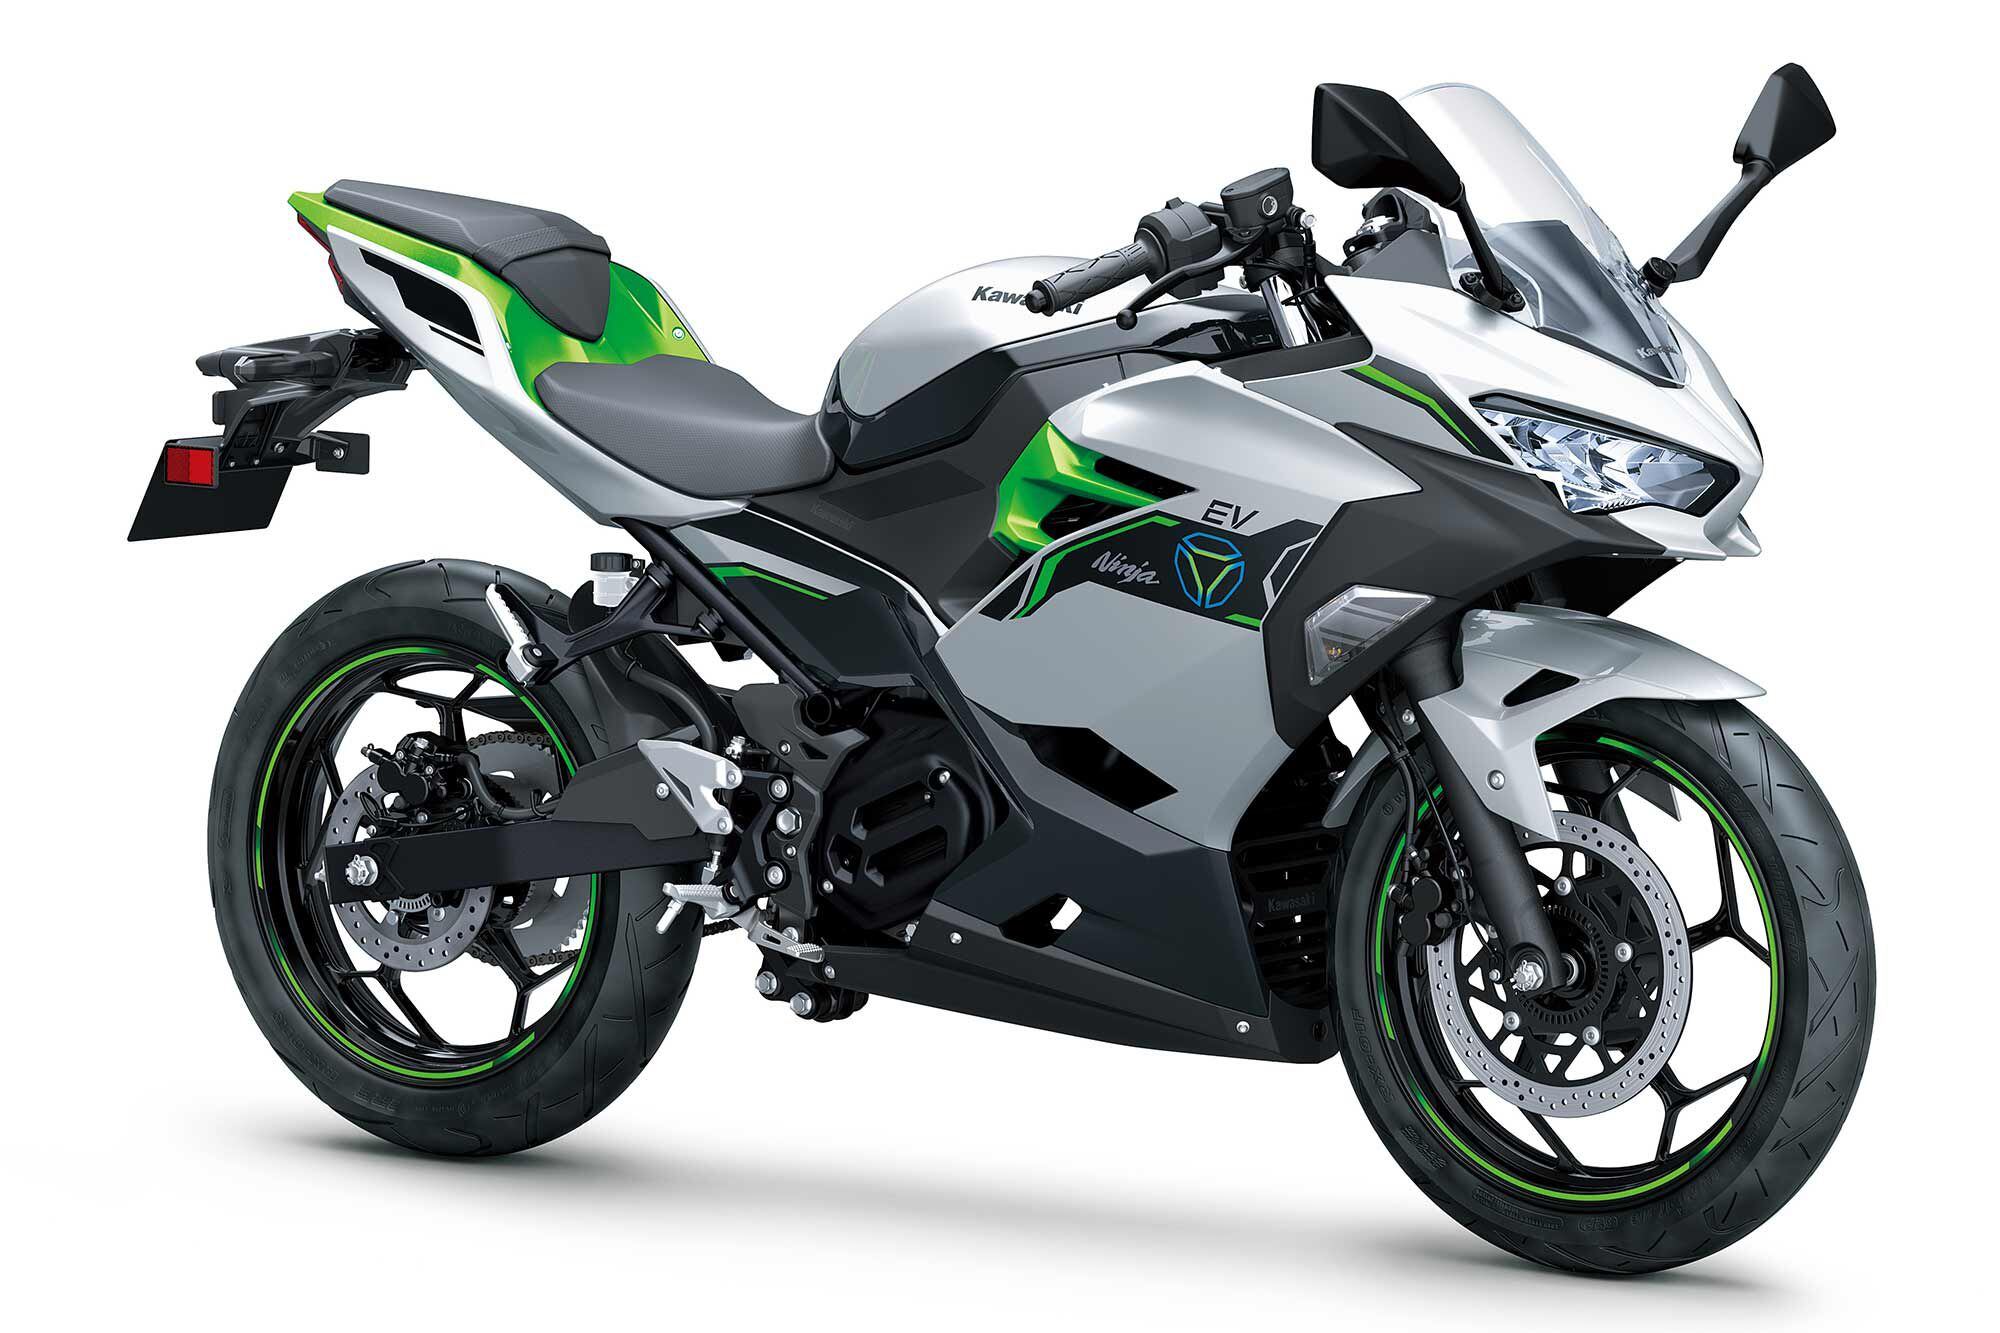 There will be two styles of motorcycles in Kawasaki’s initial E range, this is the faired Ninja-style model.